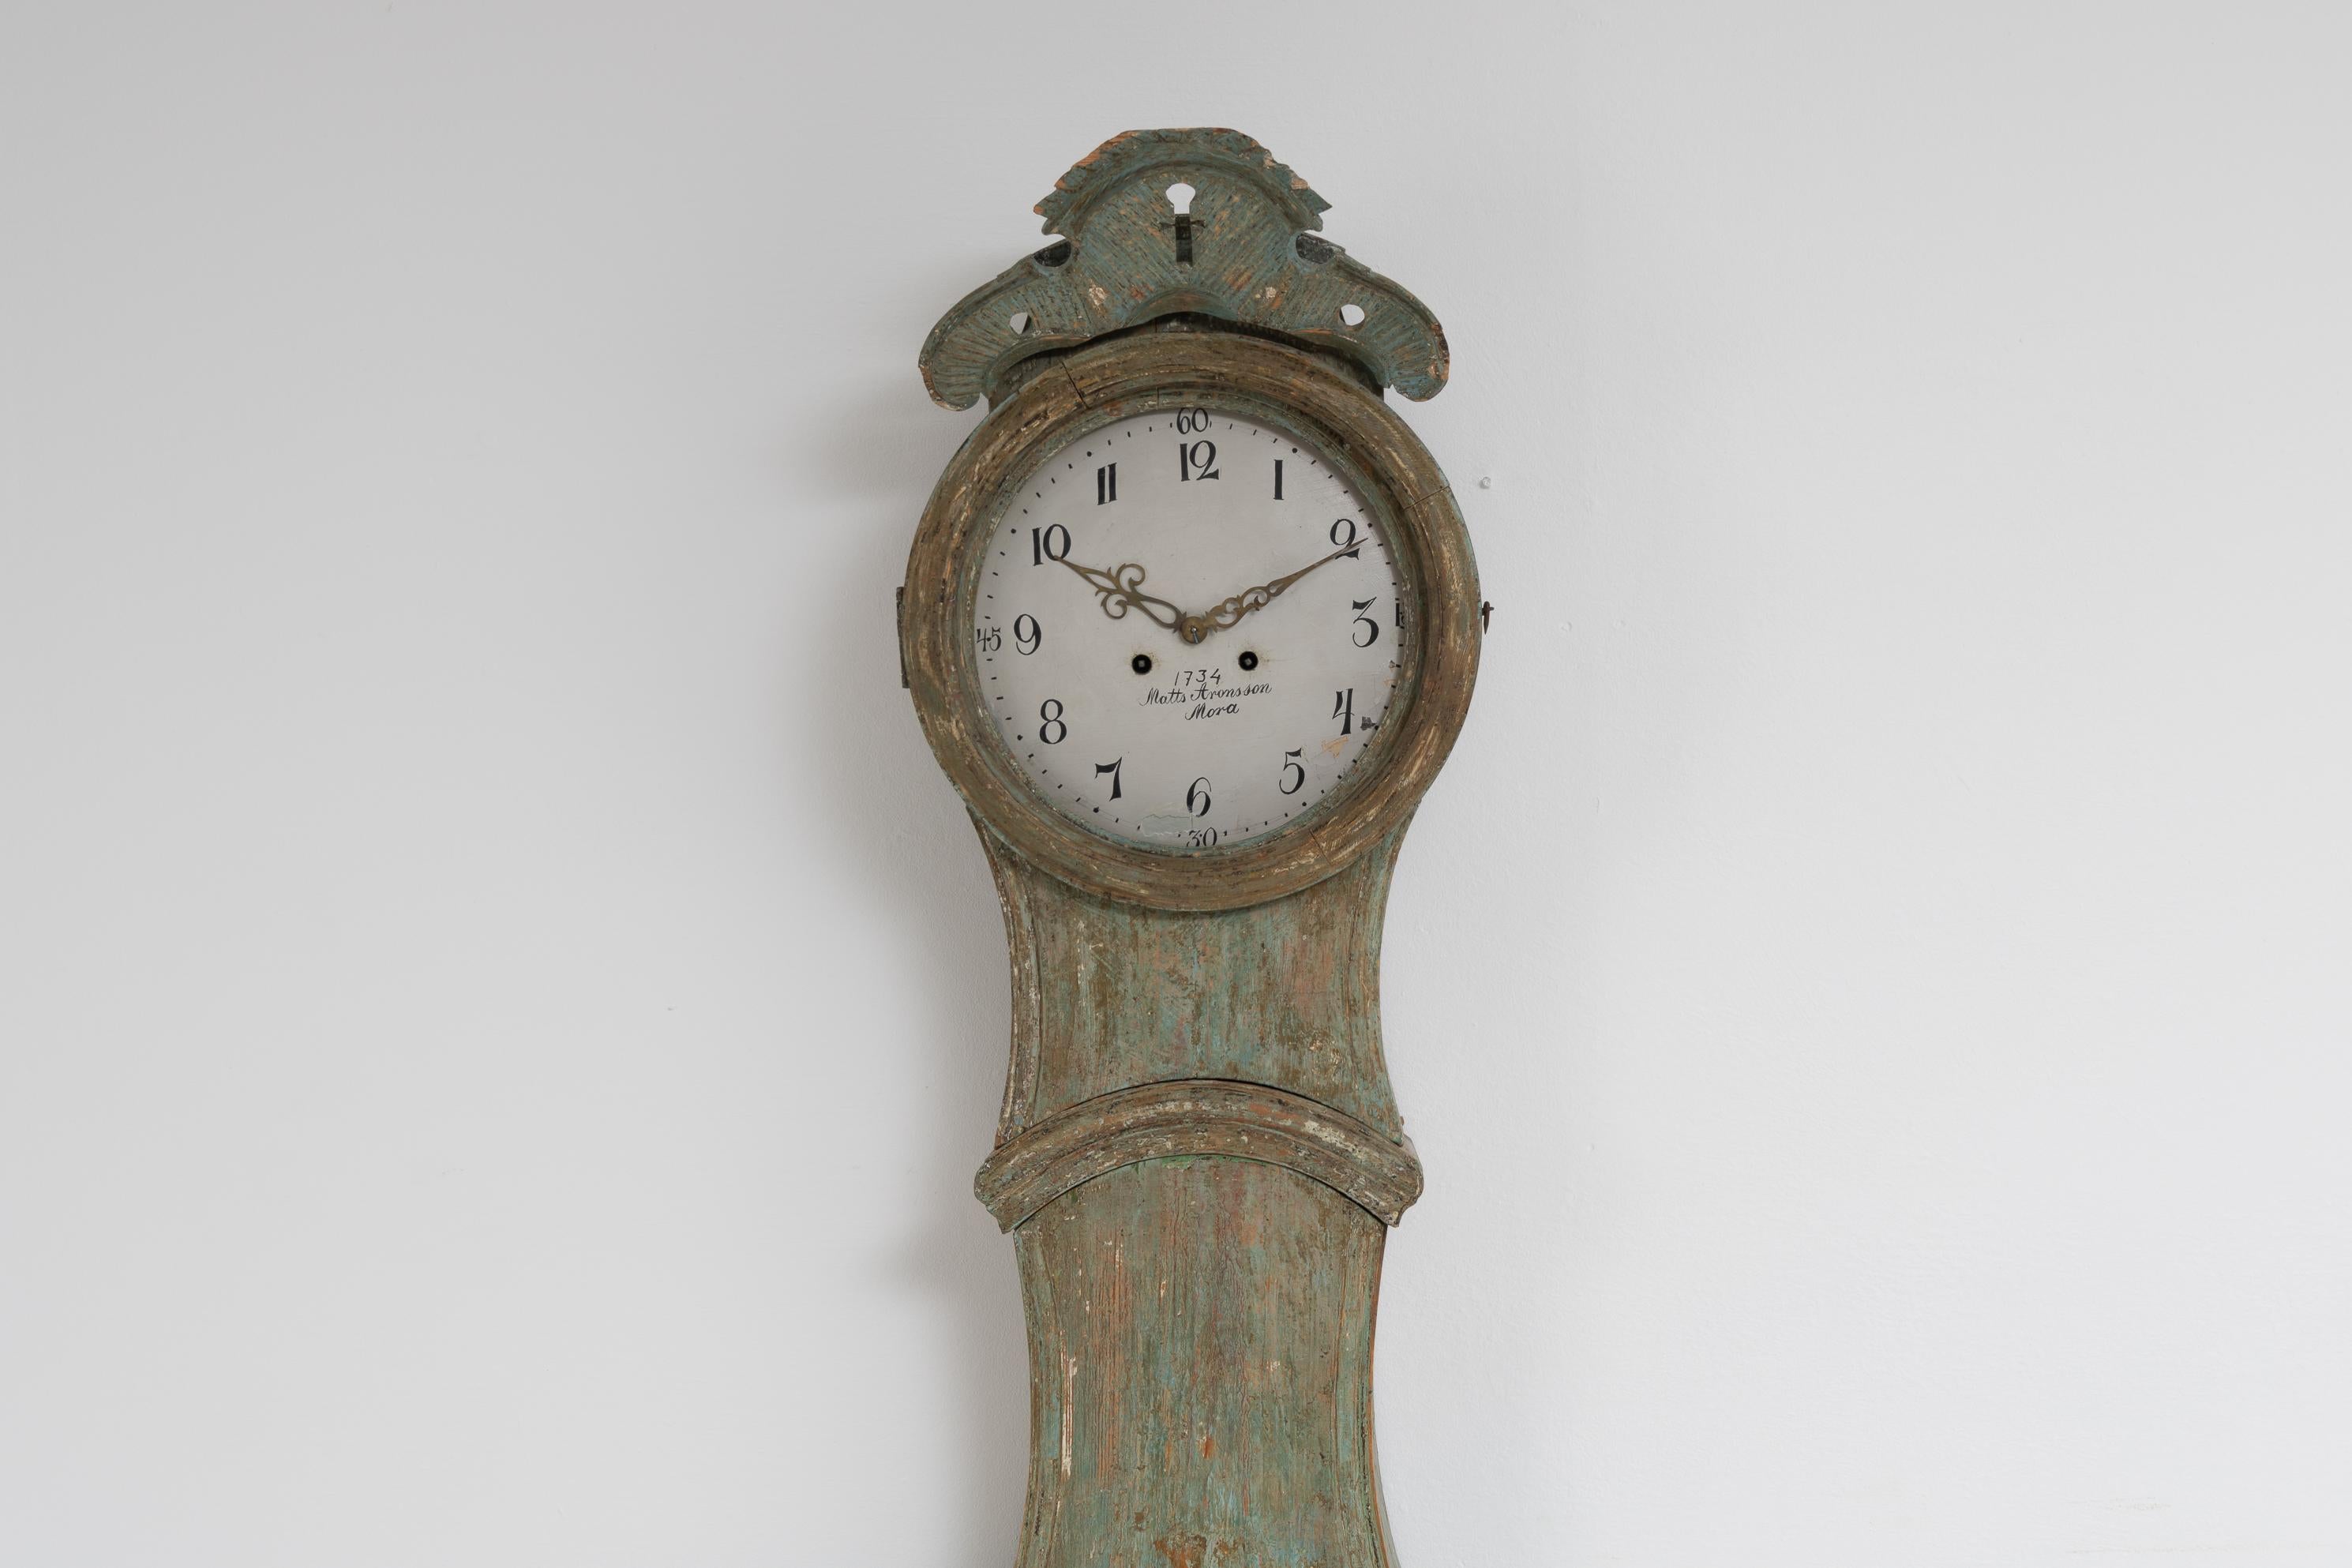 Classic Swedish long-case clock from the province Medelpad in Northern Sweden. Made around 1820 with the classic rococo shape with hand carved wood decorations. The shell shaped decoration at the top of the head is one of those and the shell is also